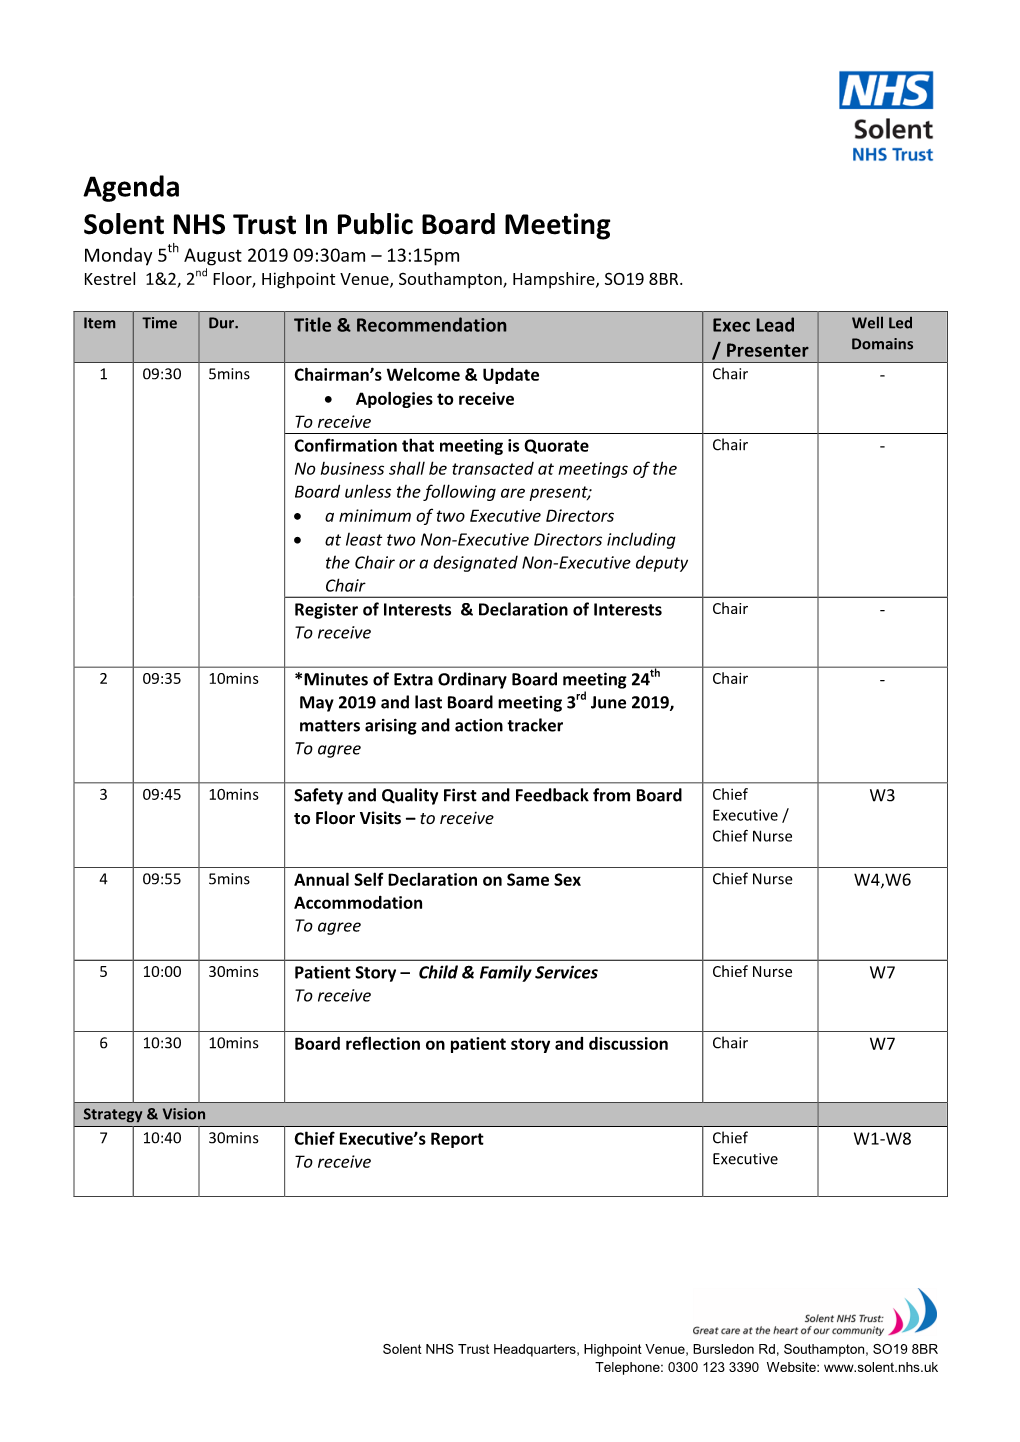 Agenda Solent NHS Trust in Public Board Meeting Monday 5Th August 2019 09:30Am – 13:15Pm Kestrel 1&2, 2Nd Floor, Highpoint Venue, Southampton, Hampshire, SO19 8BR